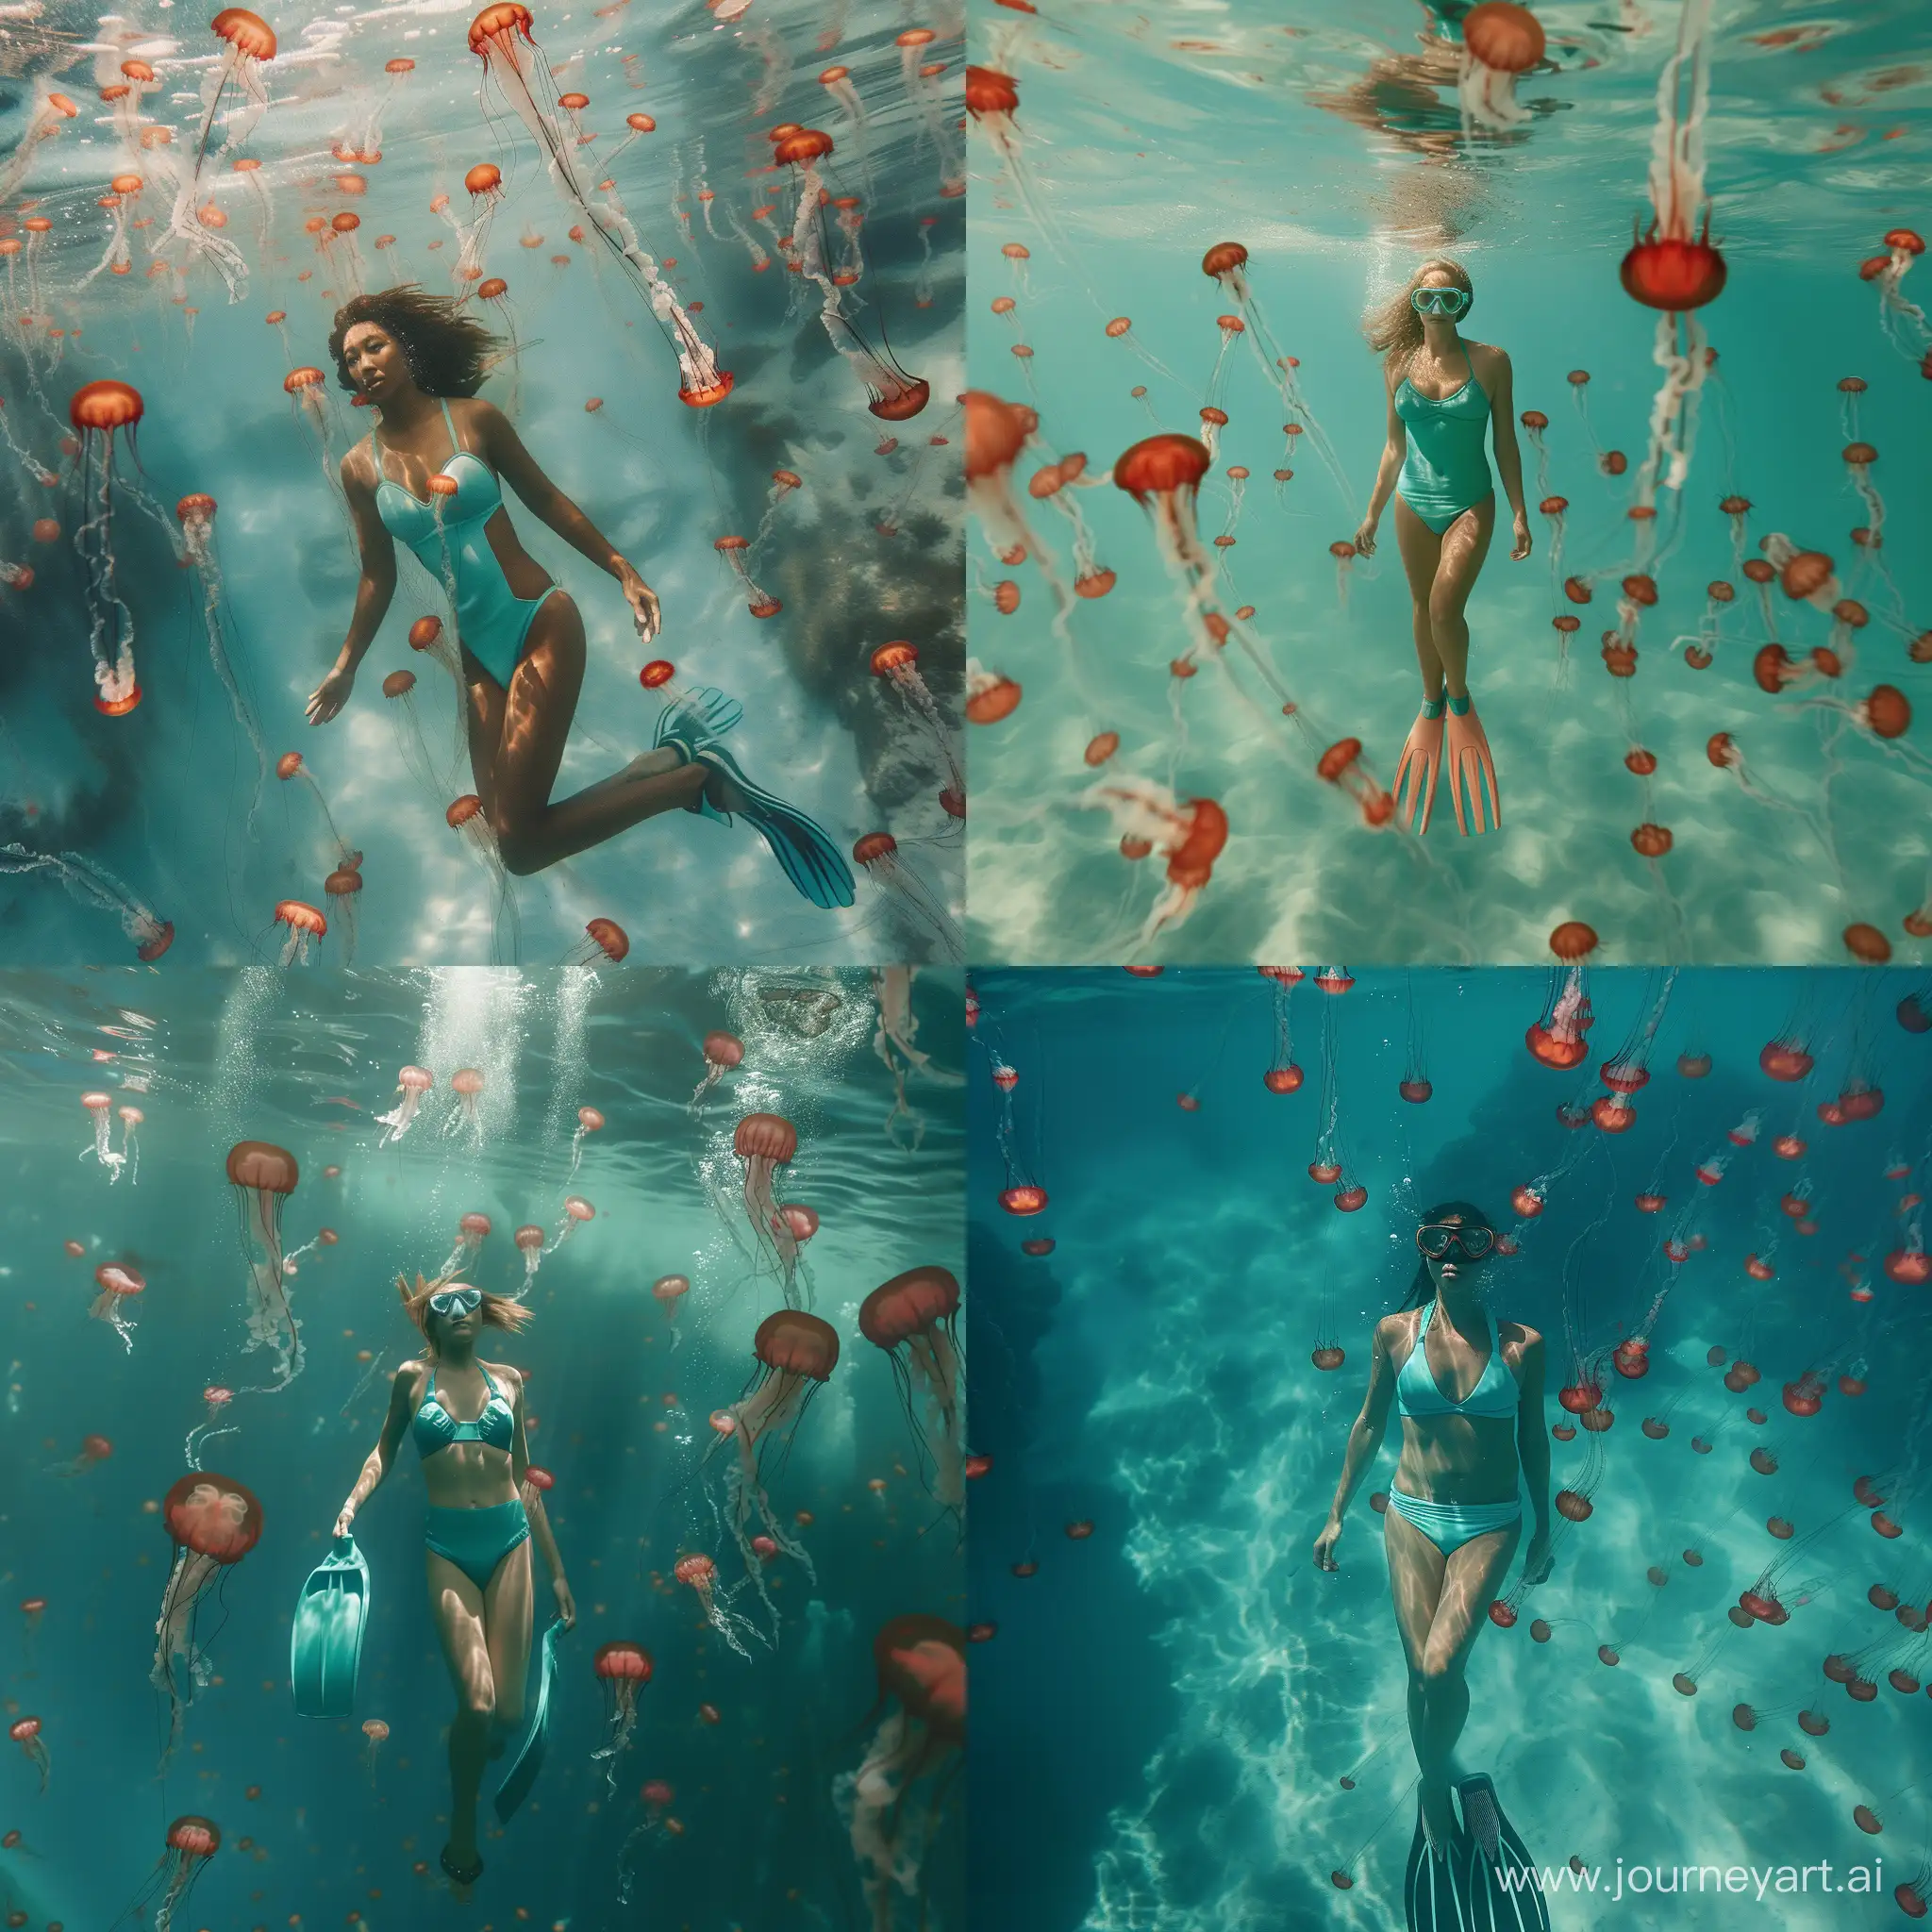 Woman-Swimming-Among-Red-Jellyfish-in-Turquoise-Swimsuit-and-Flippers